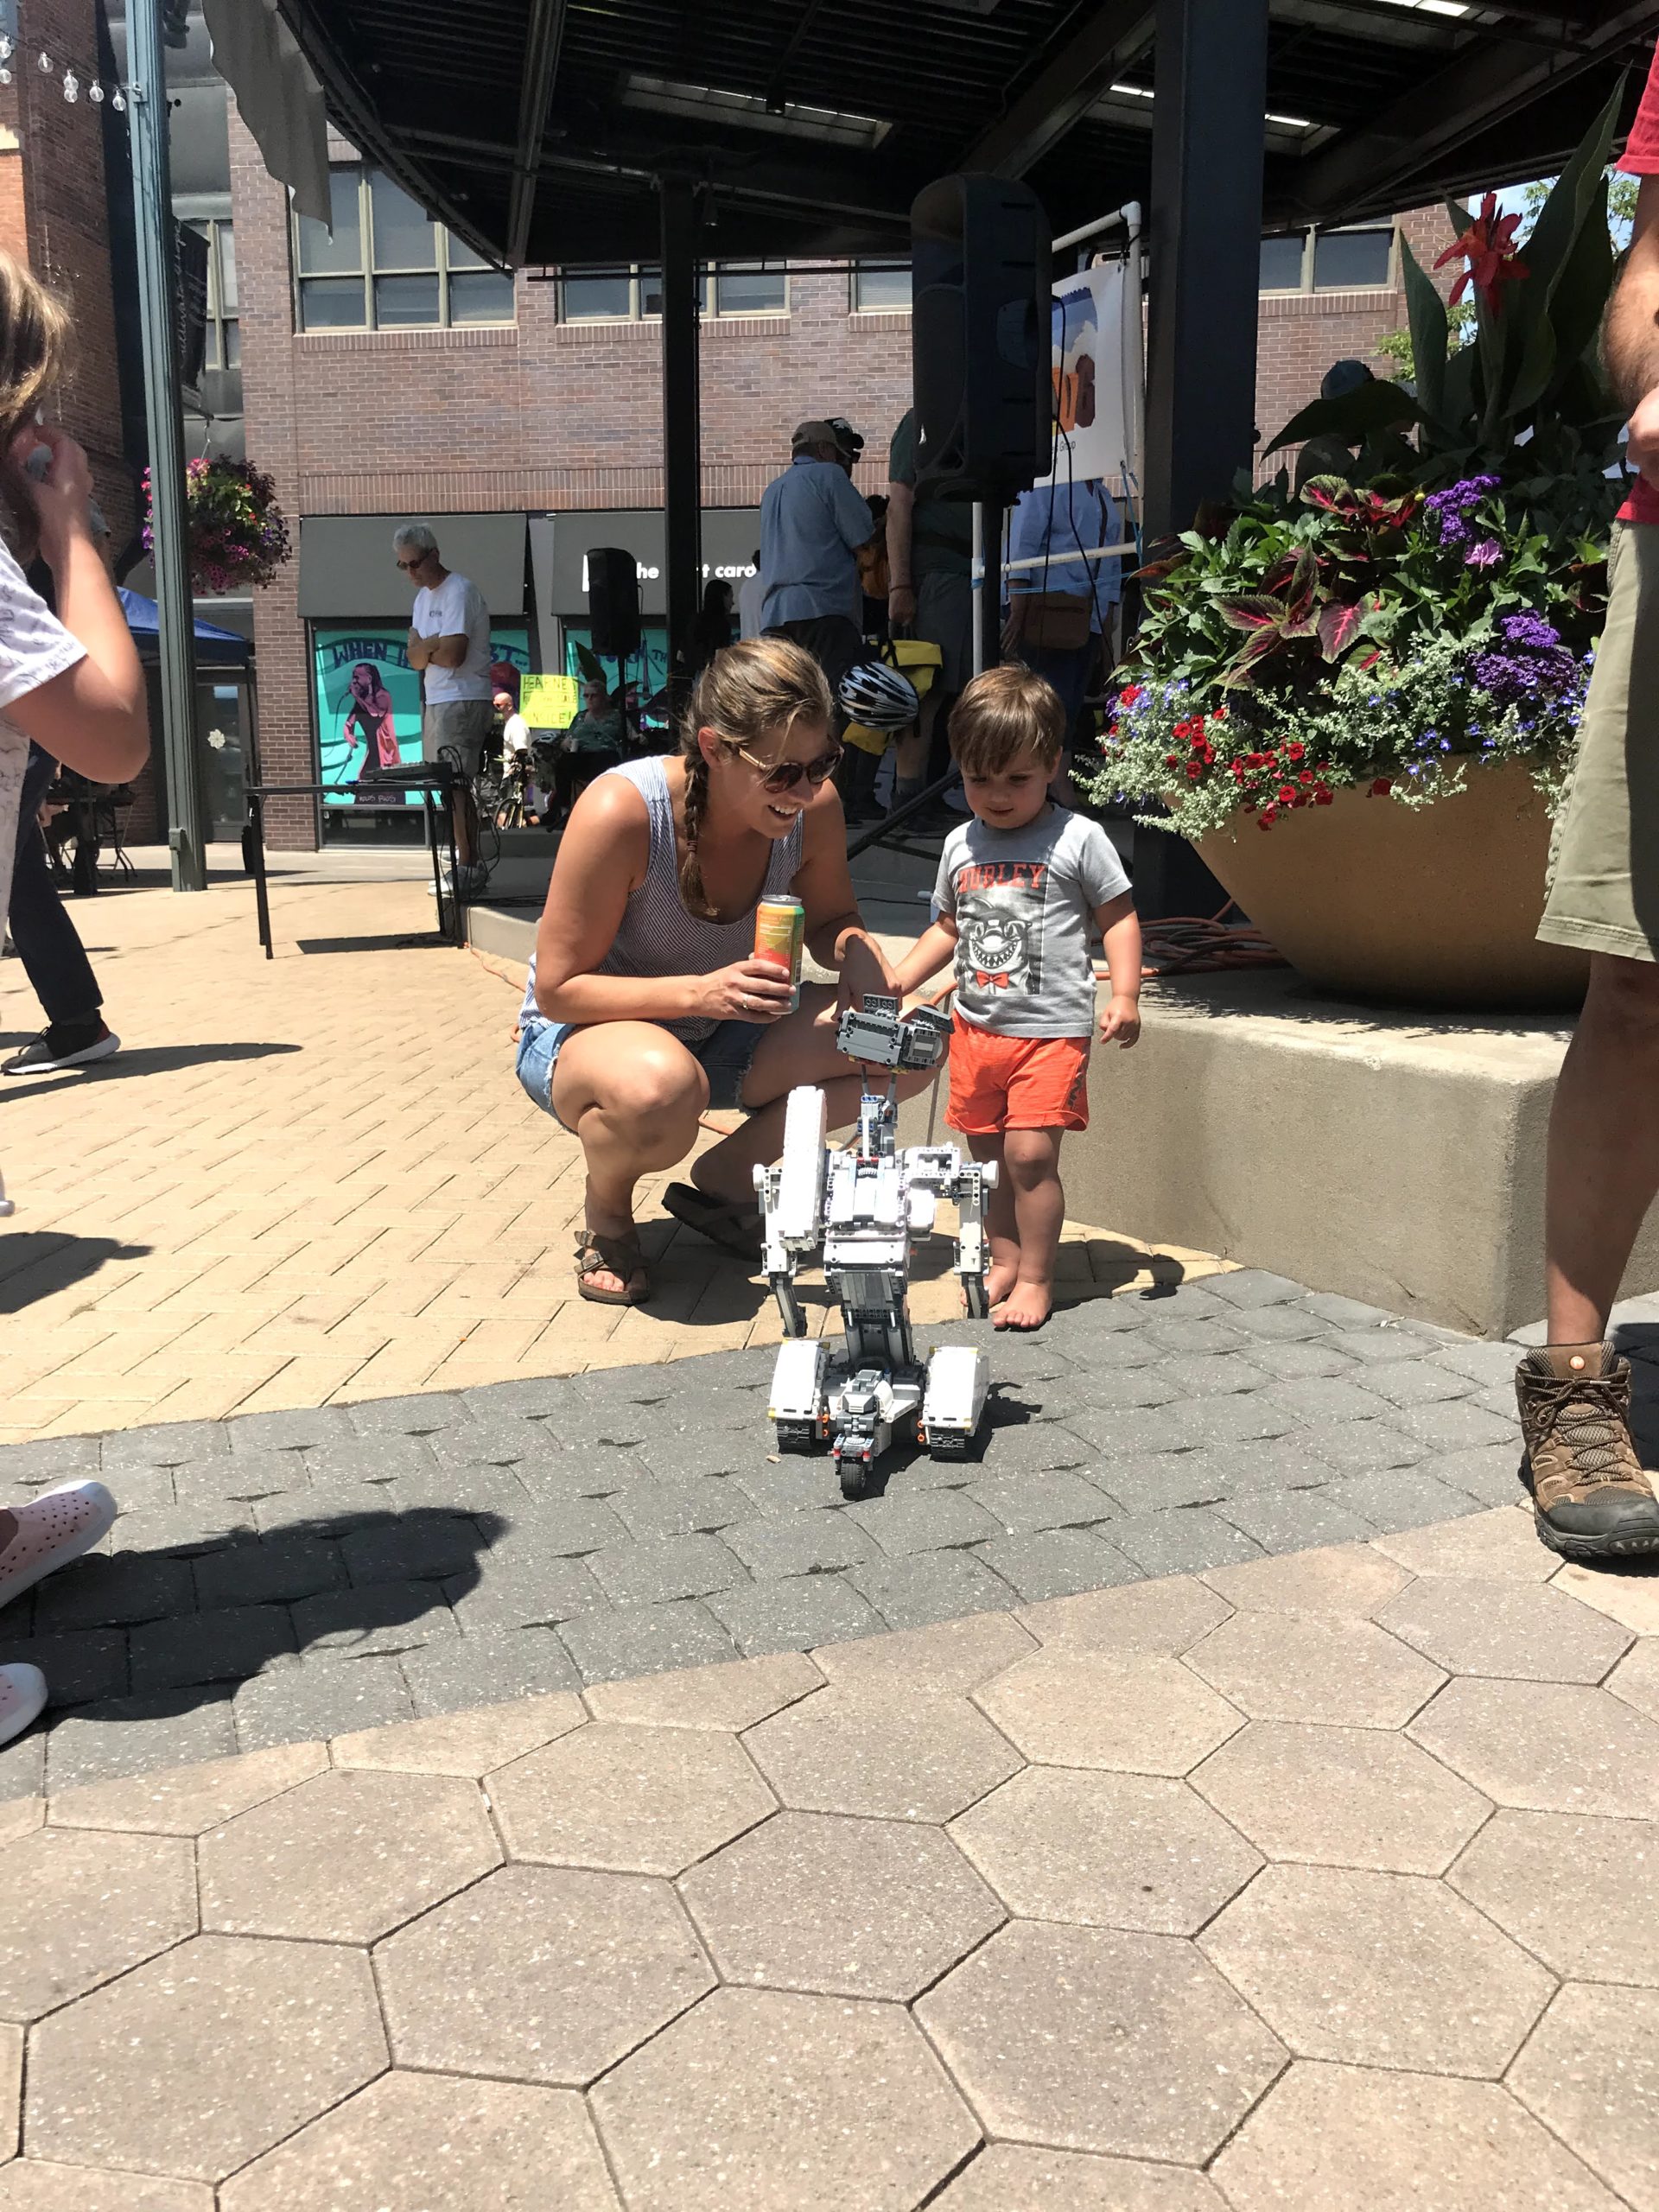 Mother and son inspecting a robot in Old Town Square